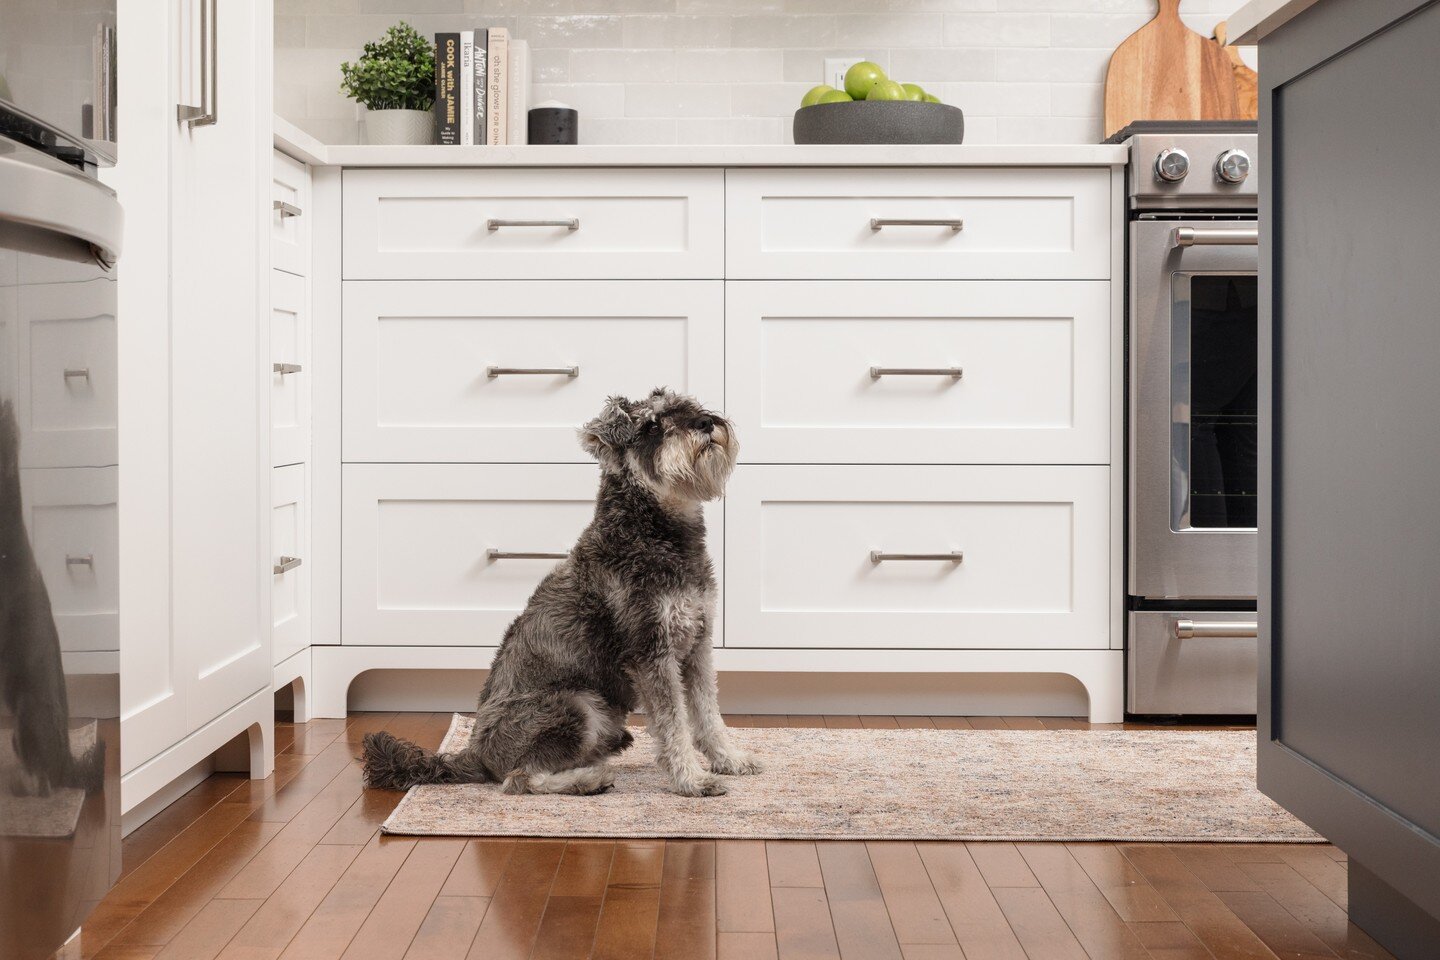 Cute pups and cute, custom curved furniture kicks. Our #hexospringbank kitchen reno is officially complete and we couldn&rsquo;t be happier with the end result!
.
📷: @jaredheynenphotography 
interior design: @hexostudio
build: @cameroncustombuilding